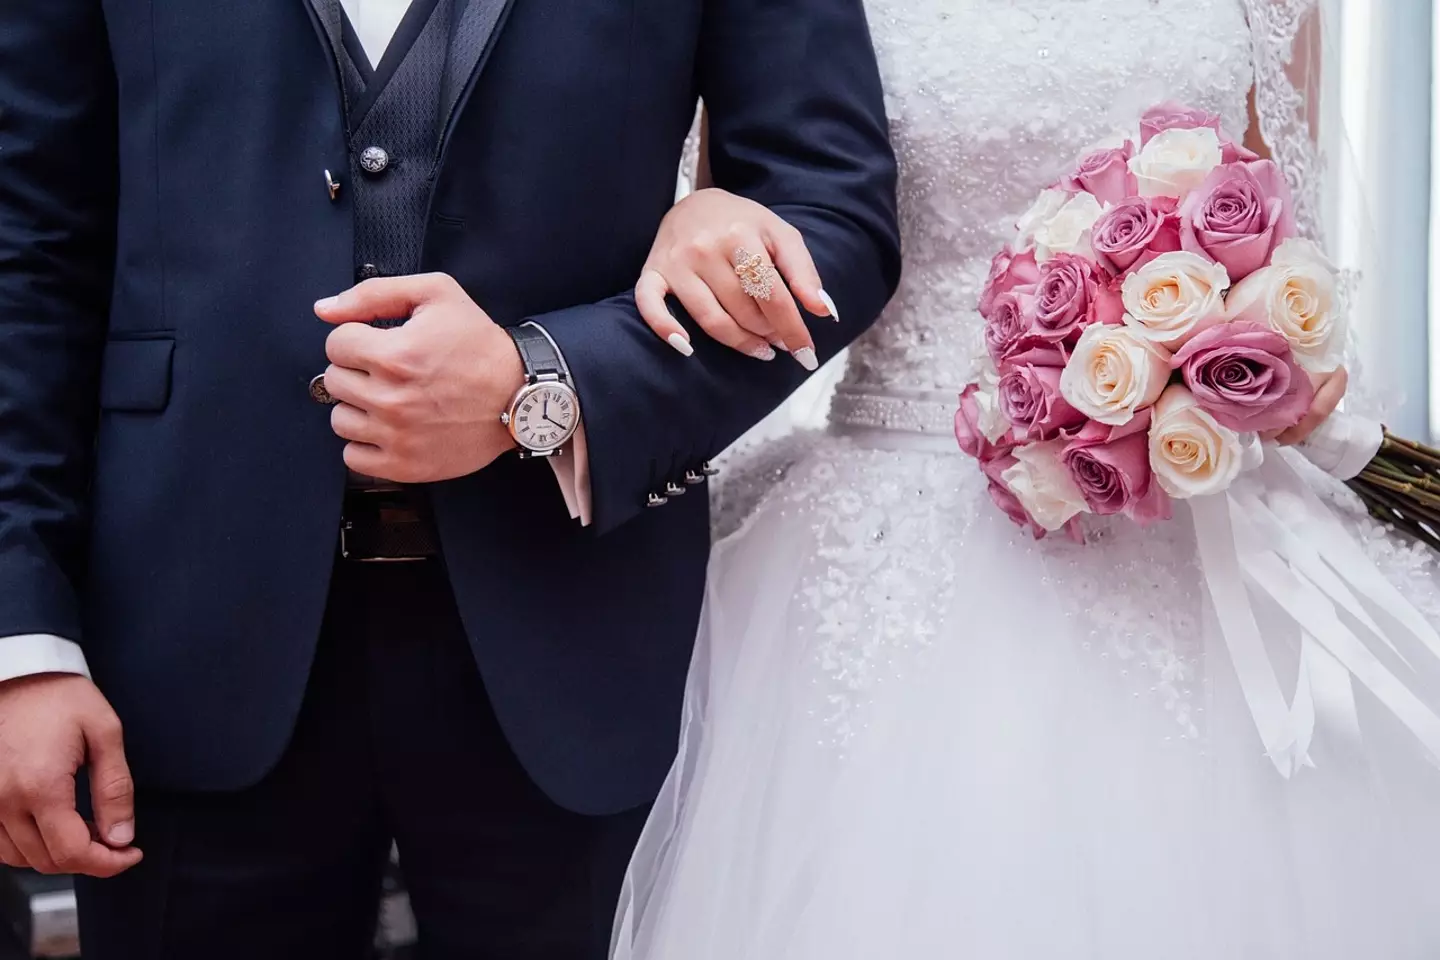 A woman has explained how she accidentally married her father-in-law.